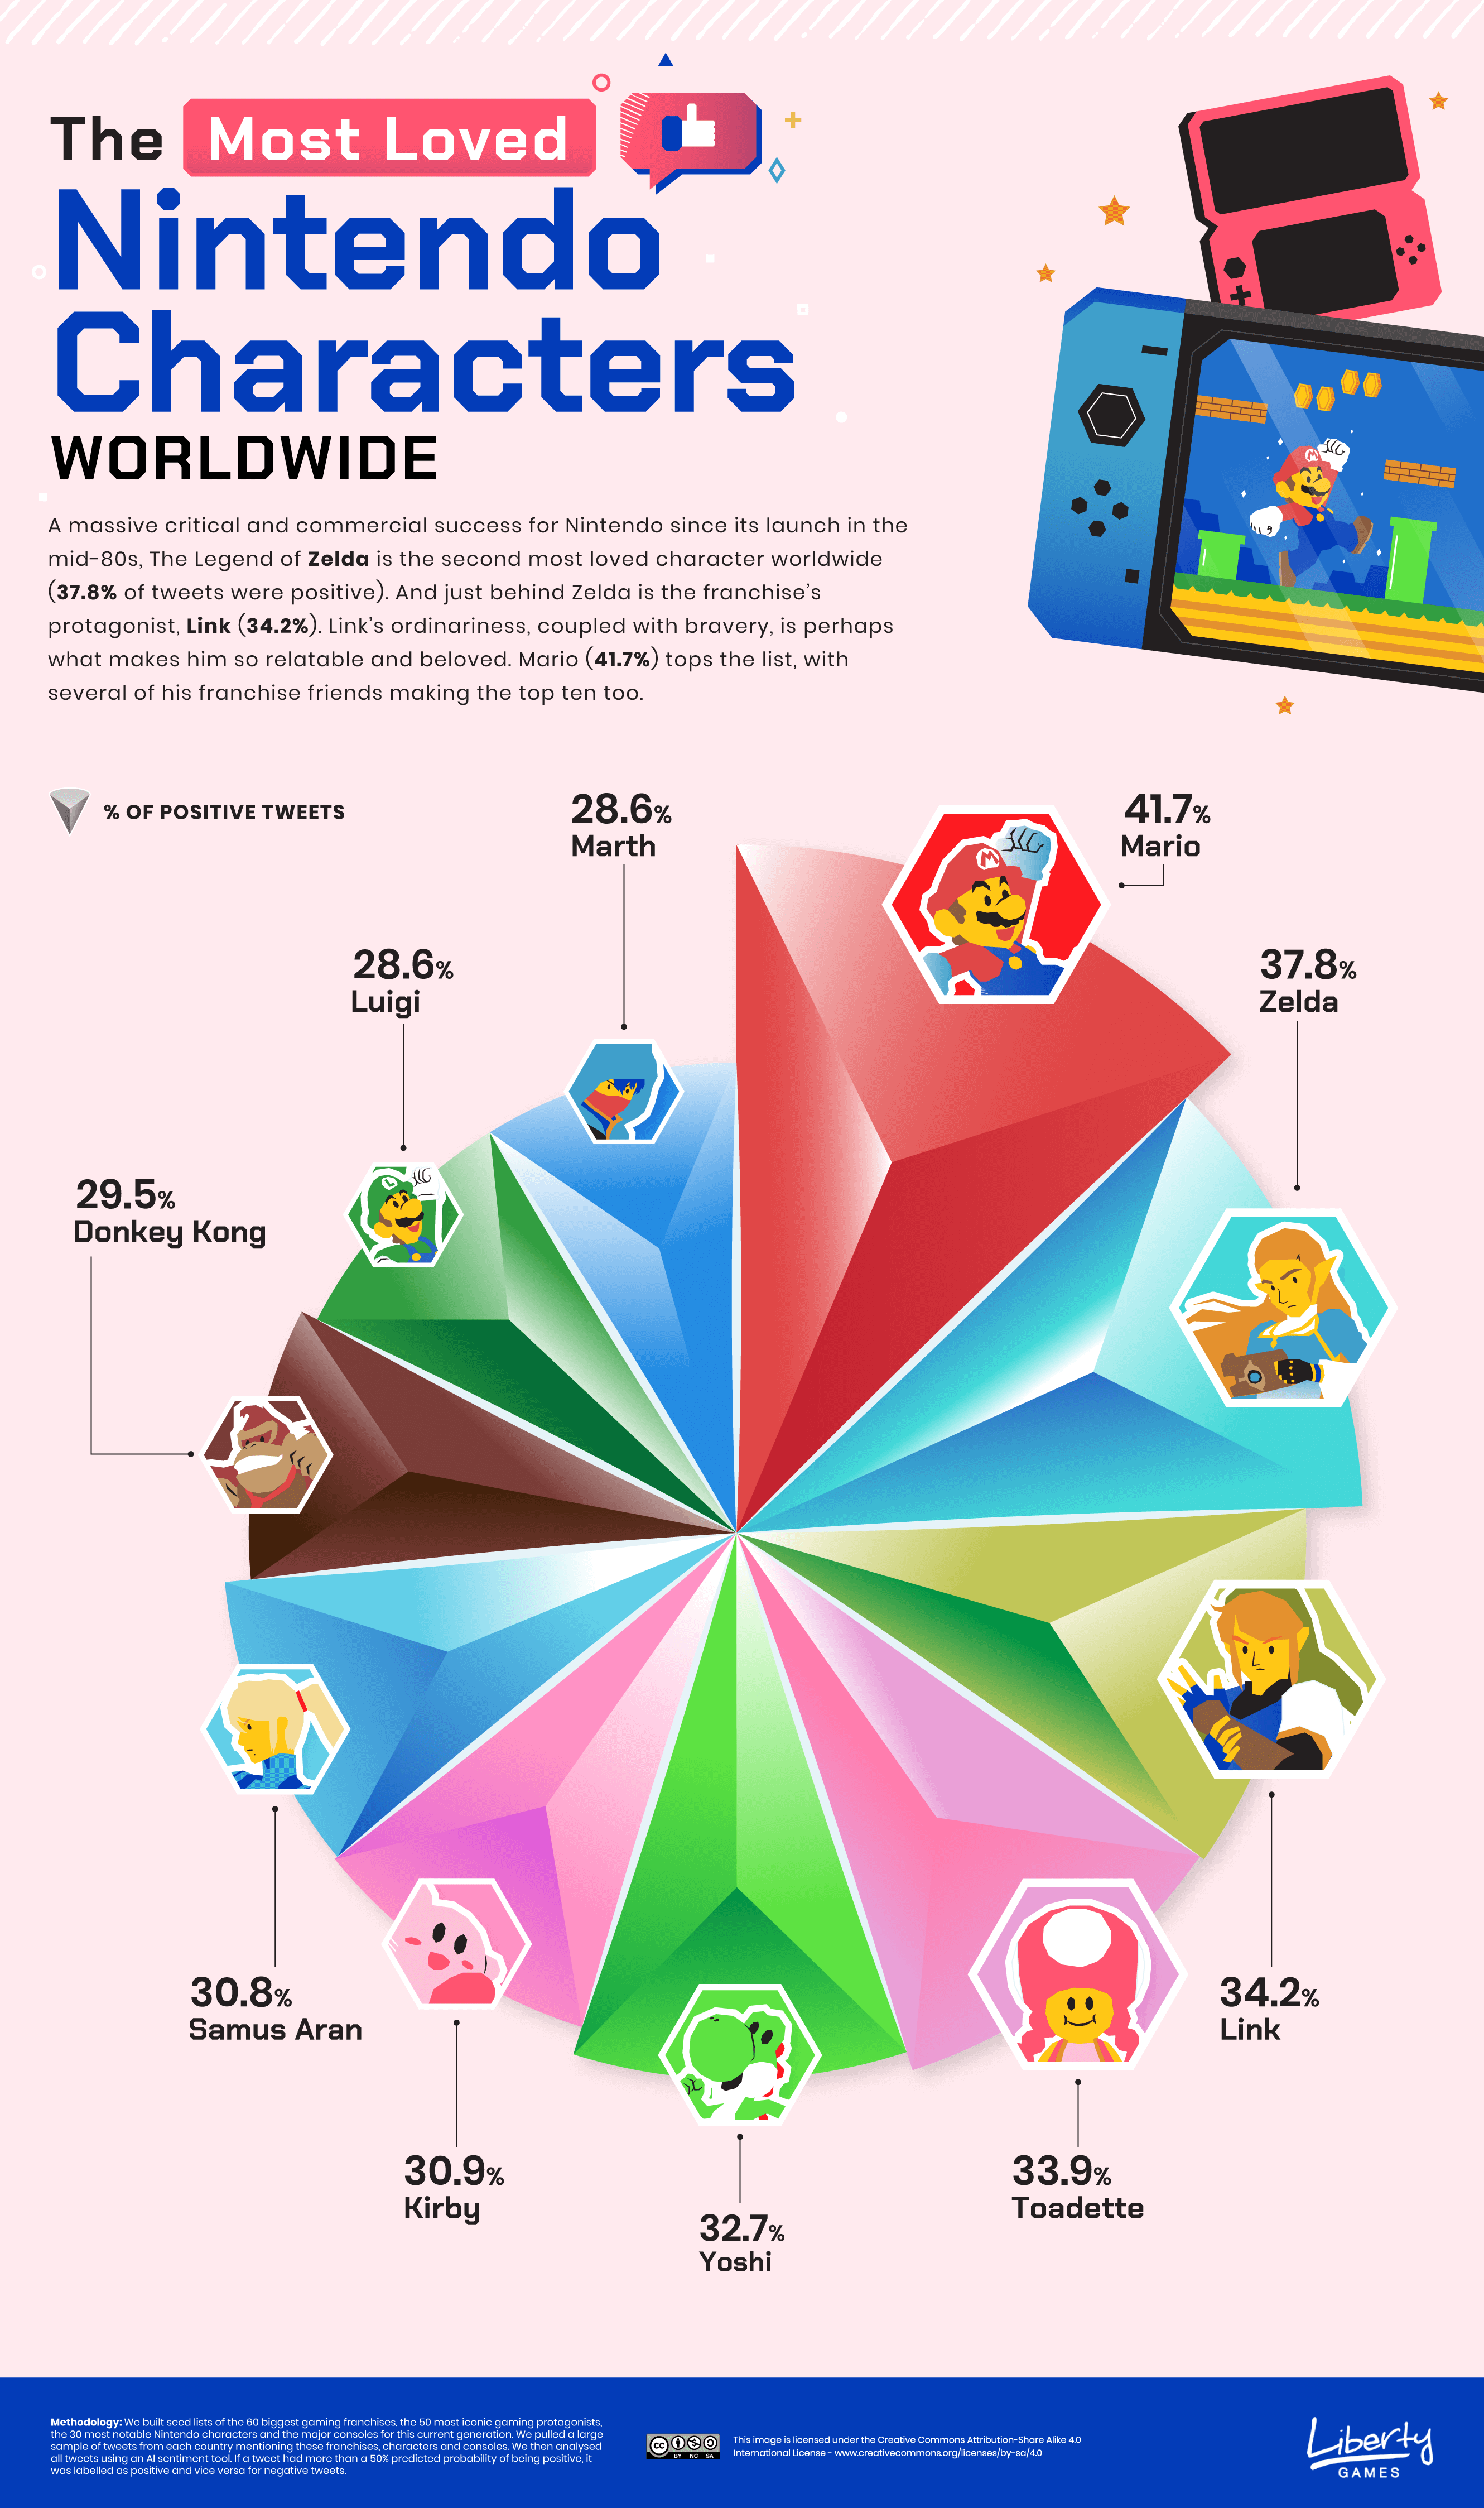 The most loved Nintendo characters ranking